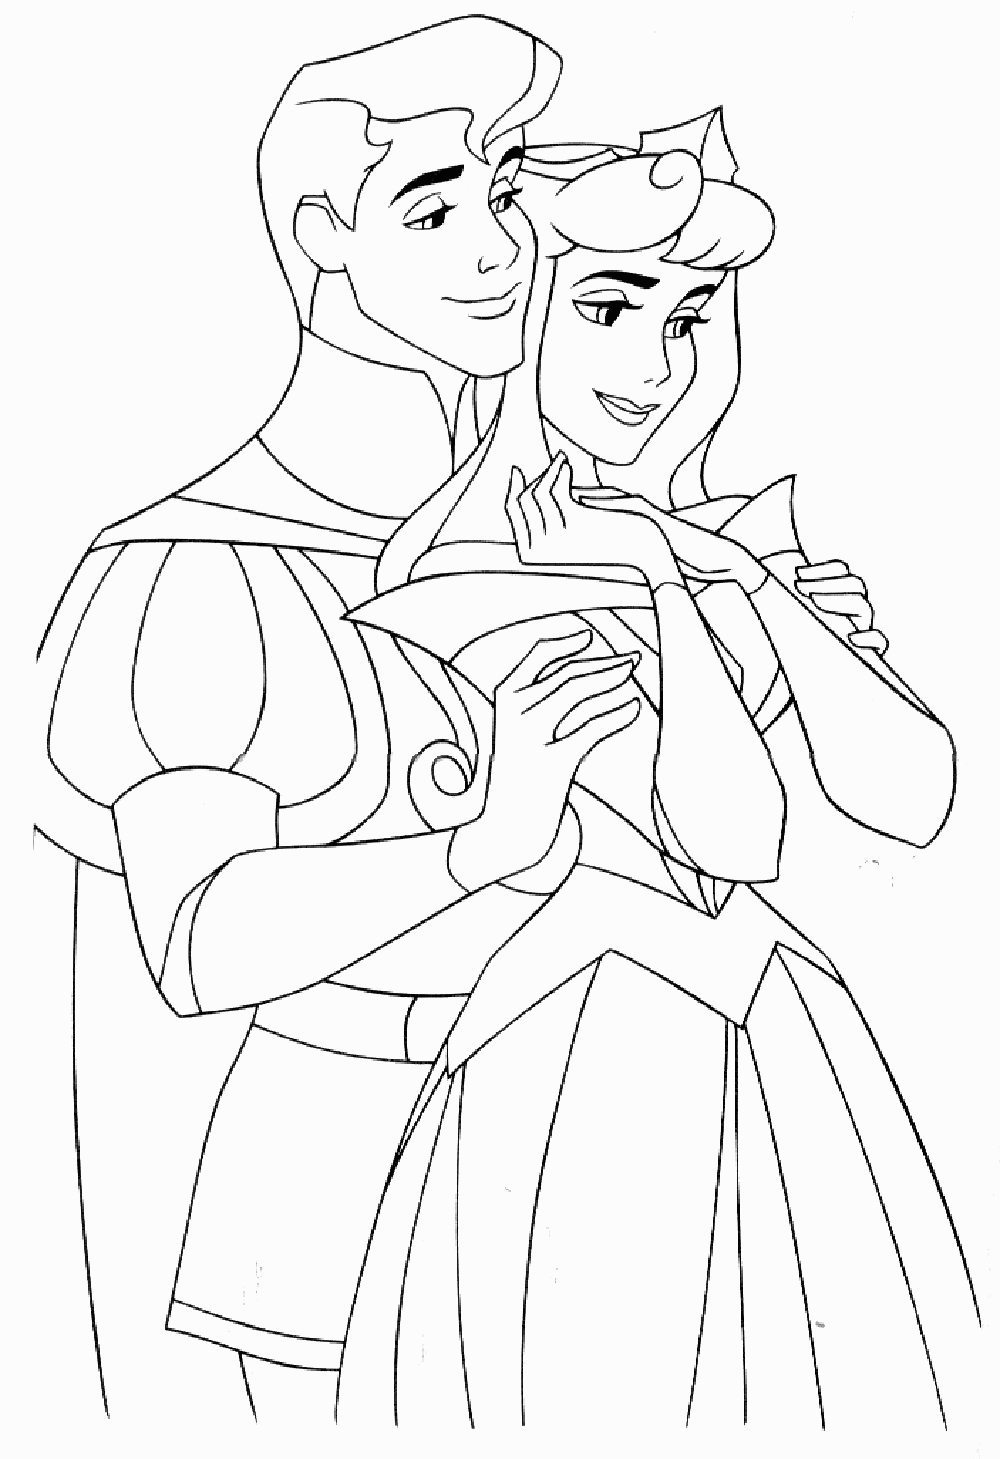 Sleeping beauty to color for kids Sleeping beauty Kids Coloring Pages